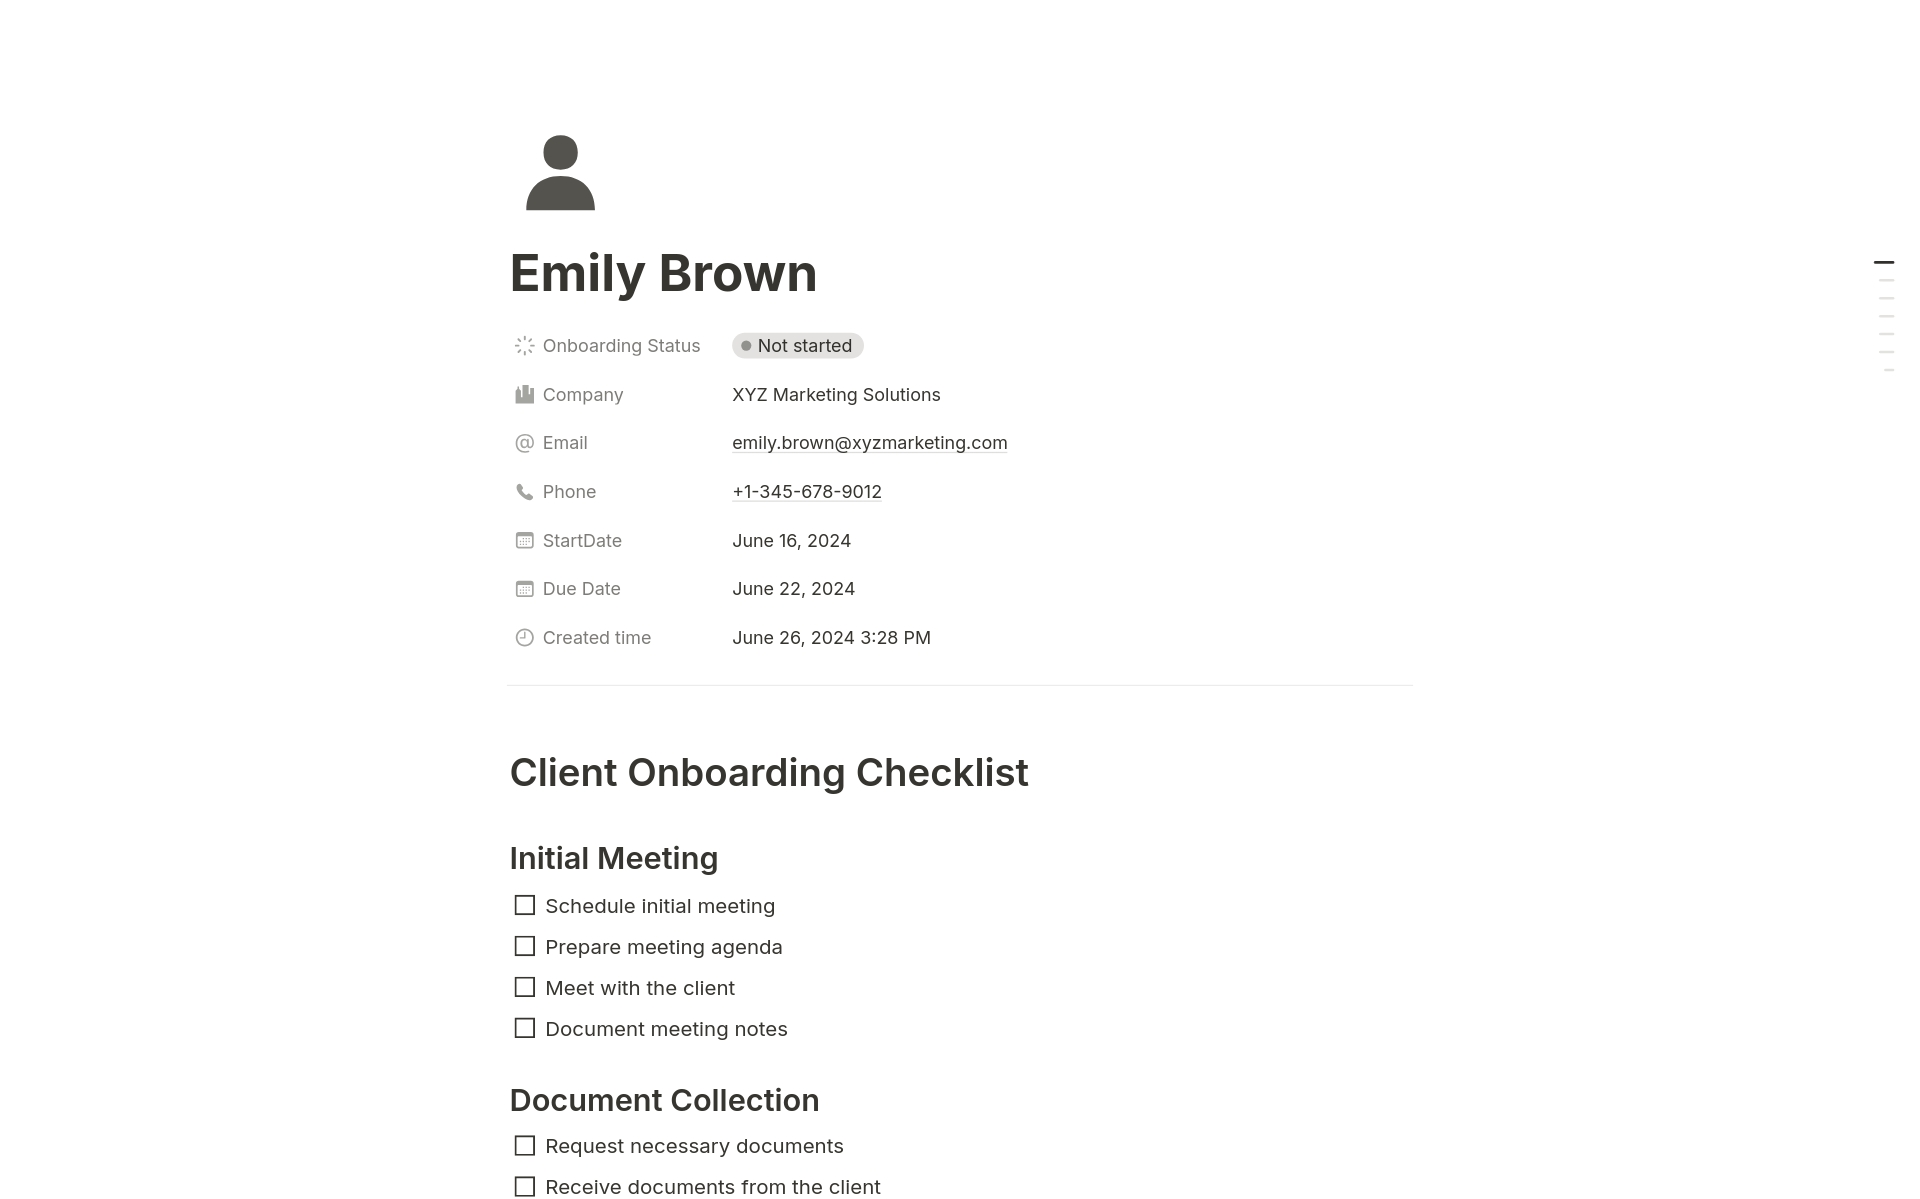 Improve client onboarding with our Notion template. Tailored for freelancers, agencies, and consultants, it manages from initial contact to project kickoff with customizable checklists, tasks, and client logs in one workspace.